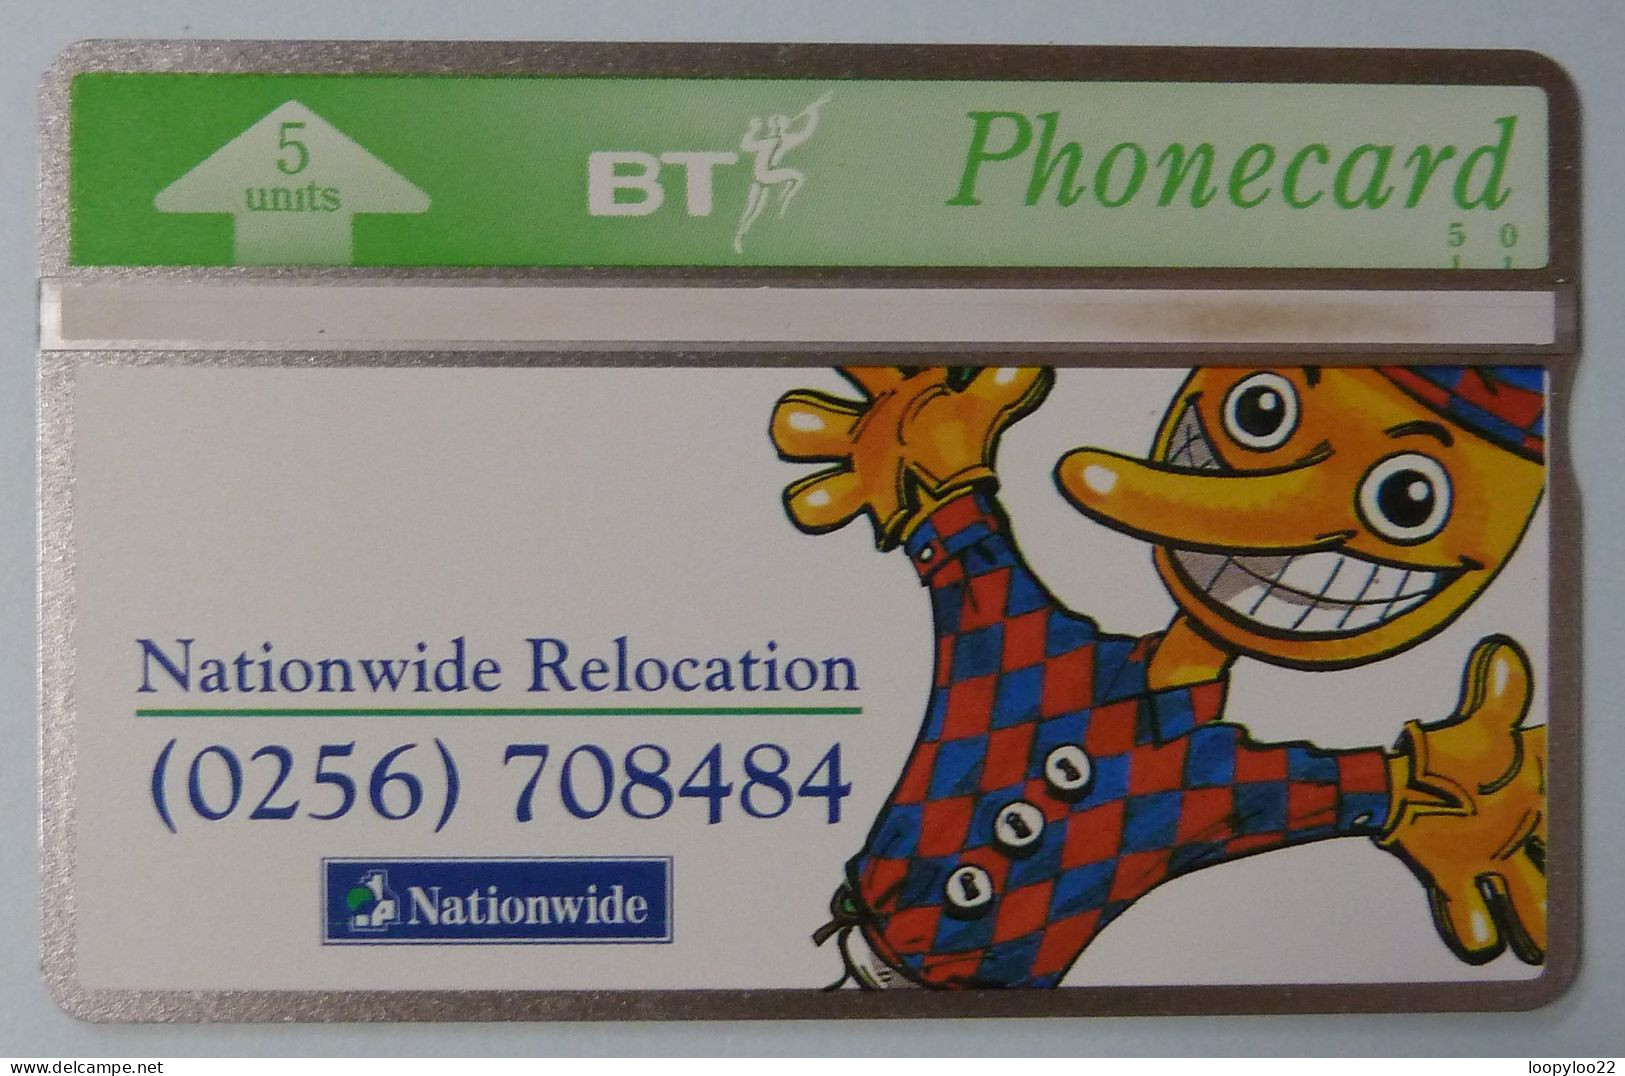 UK - Great Britain - BT & Landis & Gyr - BTP111 - Nationwide Relocation - 227A - 6817ex - Mint - BT Private Issues